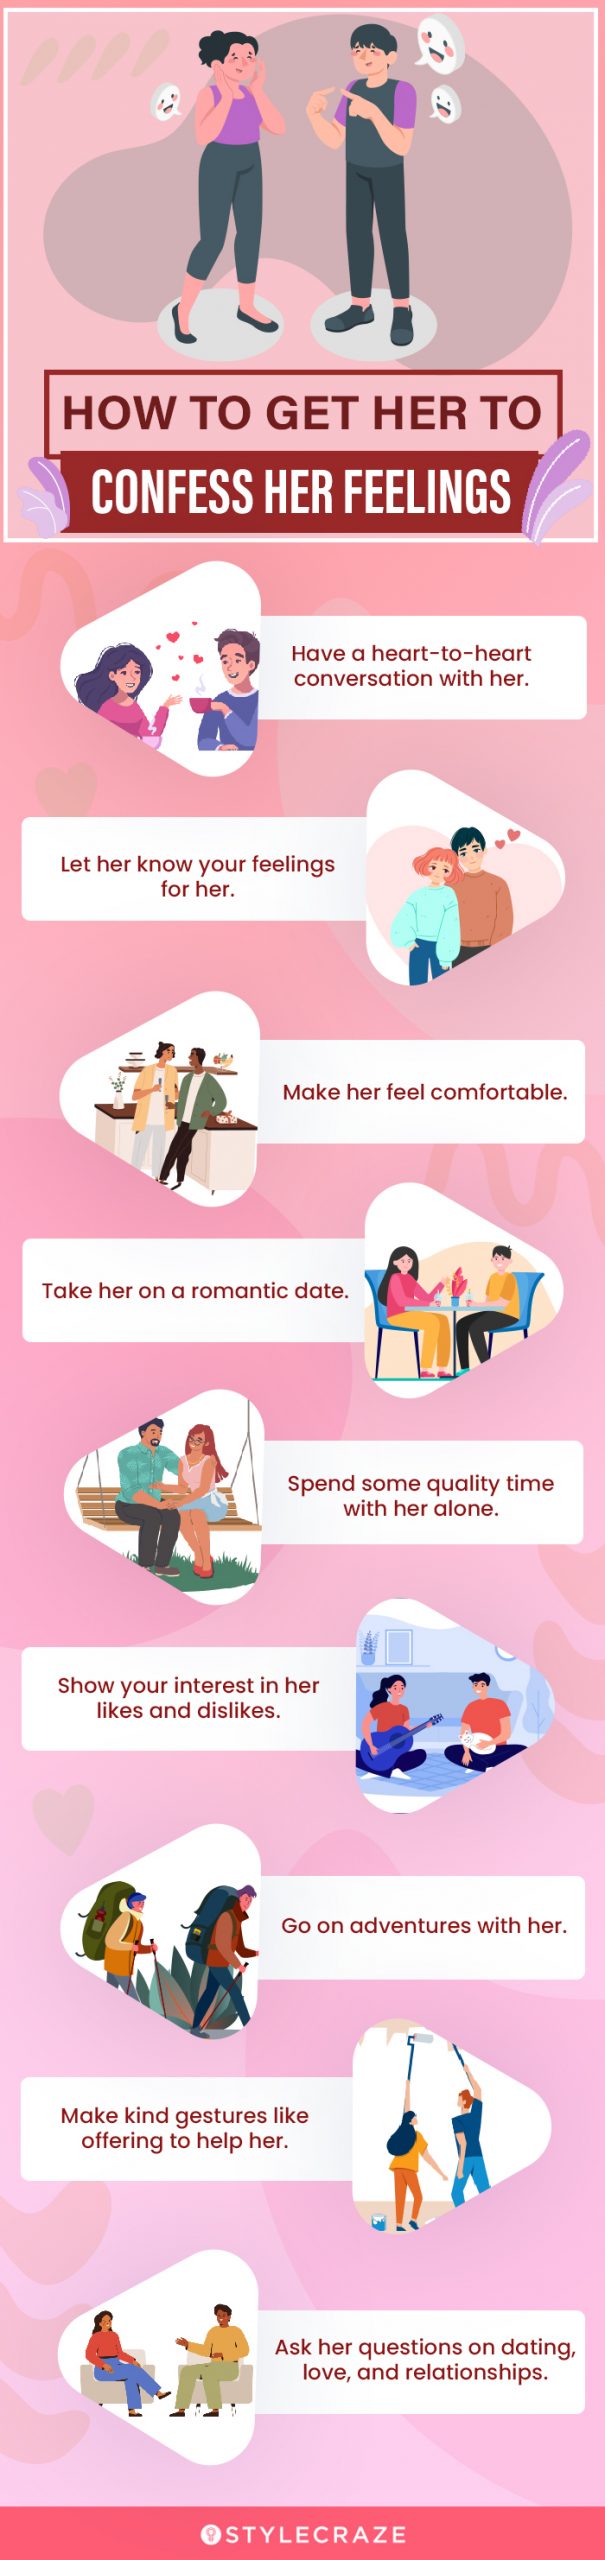 how to get her to confess her feelings [infographic]